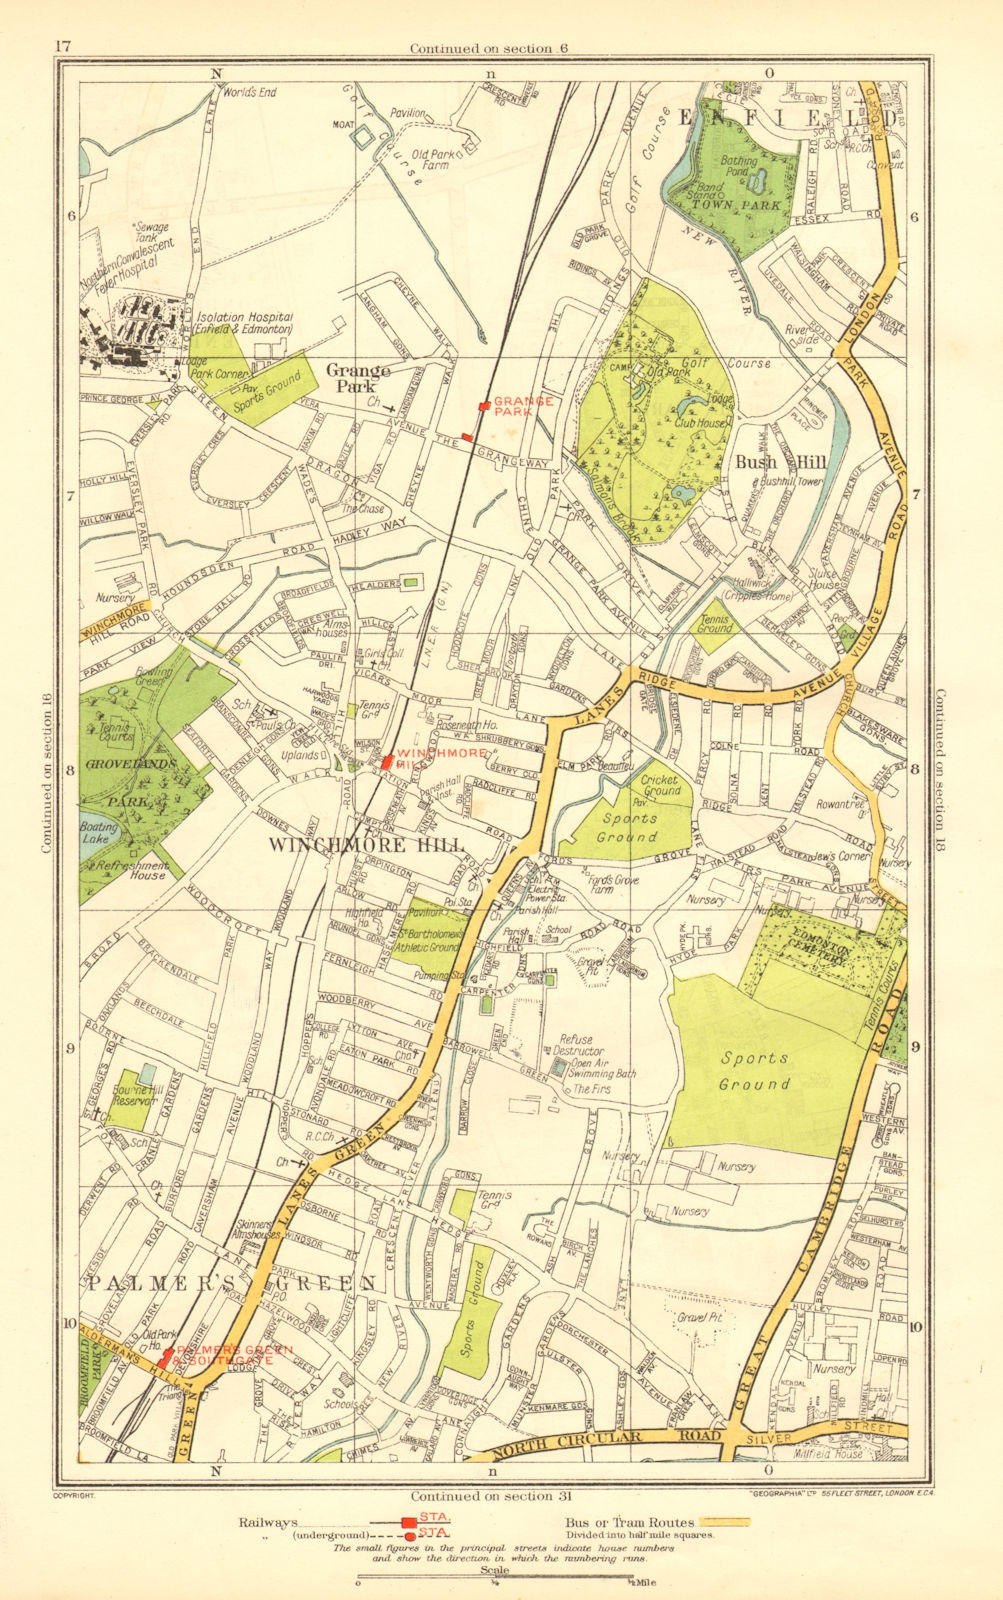 Associate Product SOUTHGATE. Winchmore Hill Grange Park Palmers Green Bush Hill 1937 old map